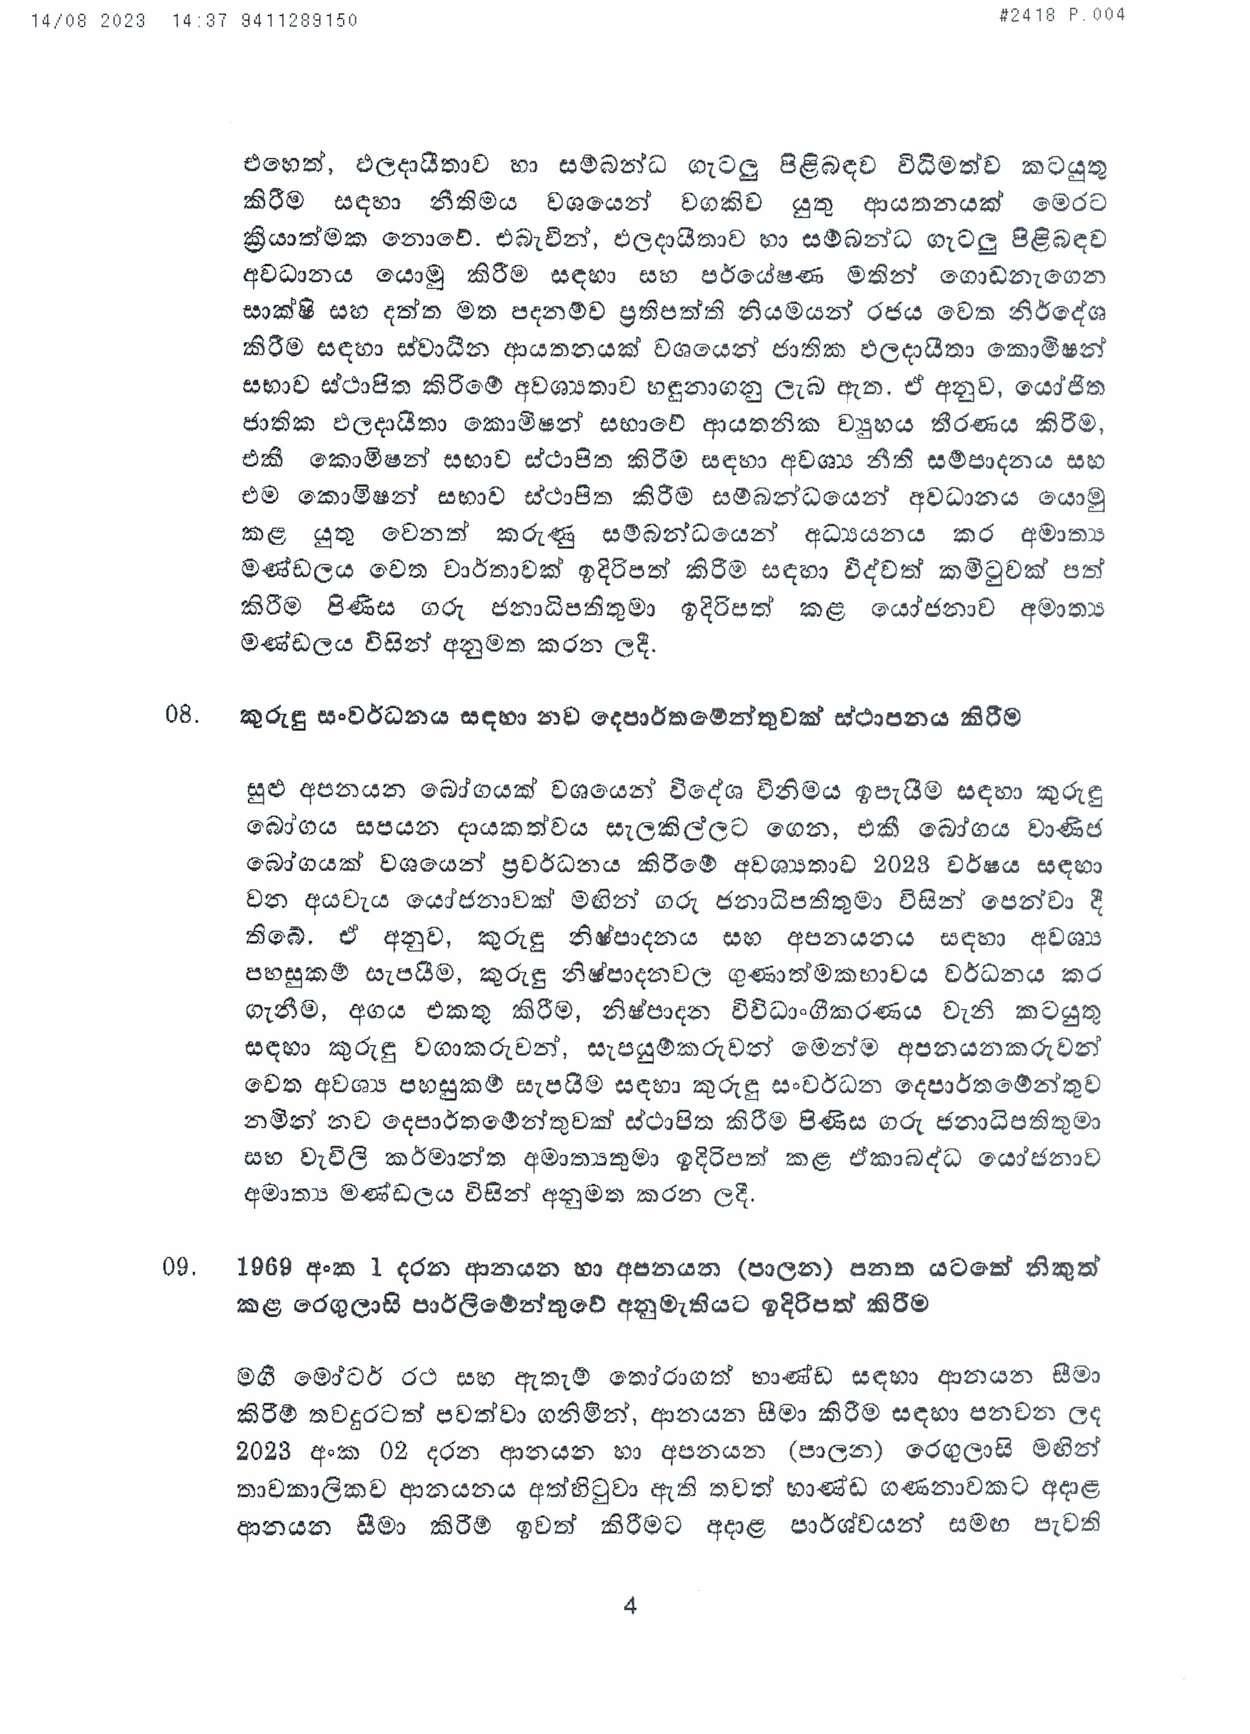 Cabinet Decision on 14.08.2023 page 004